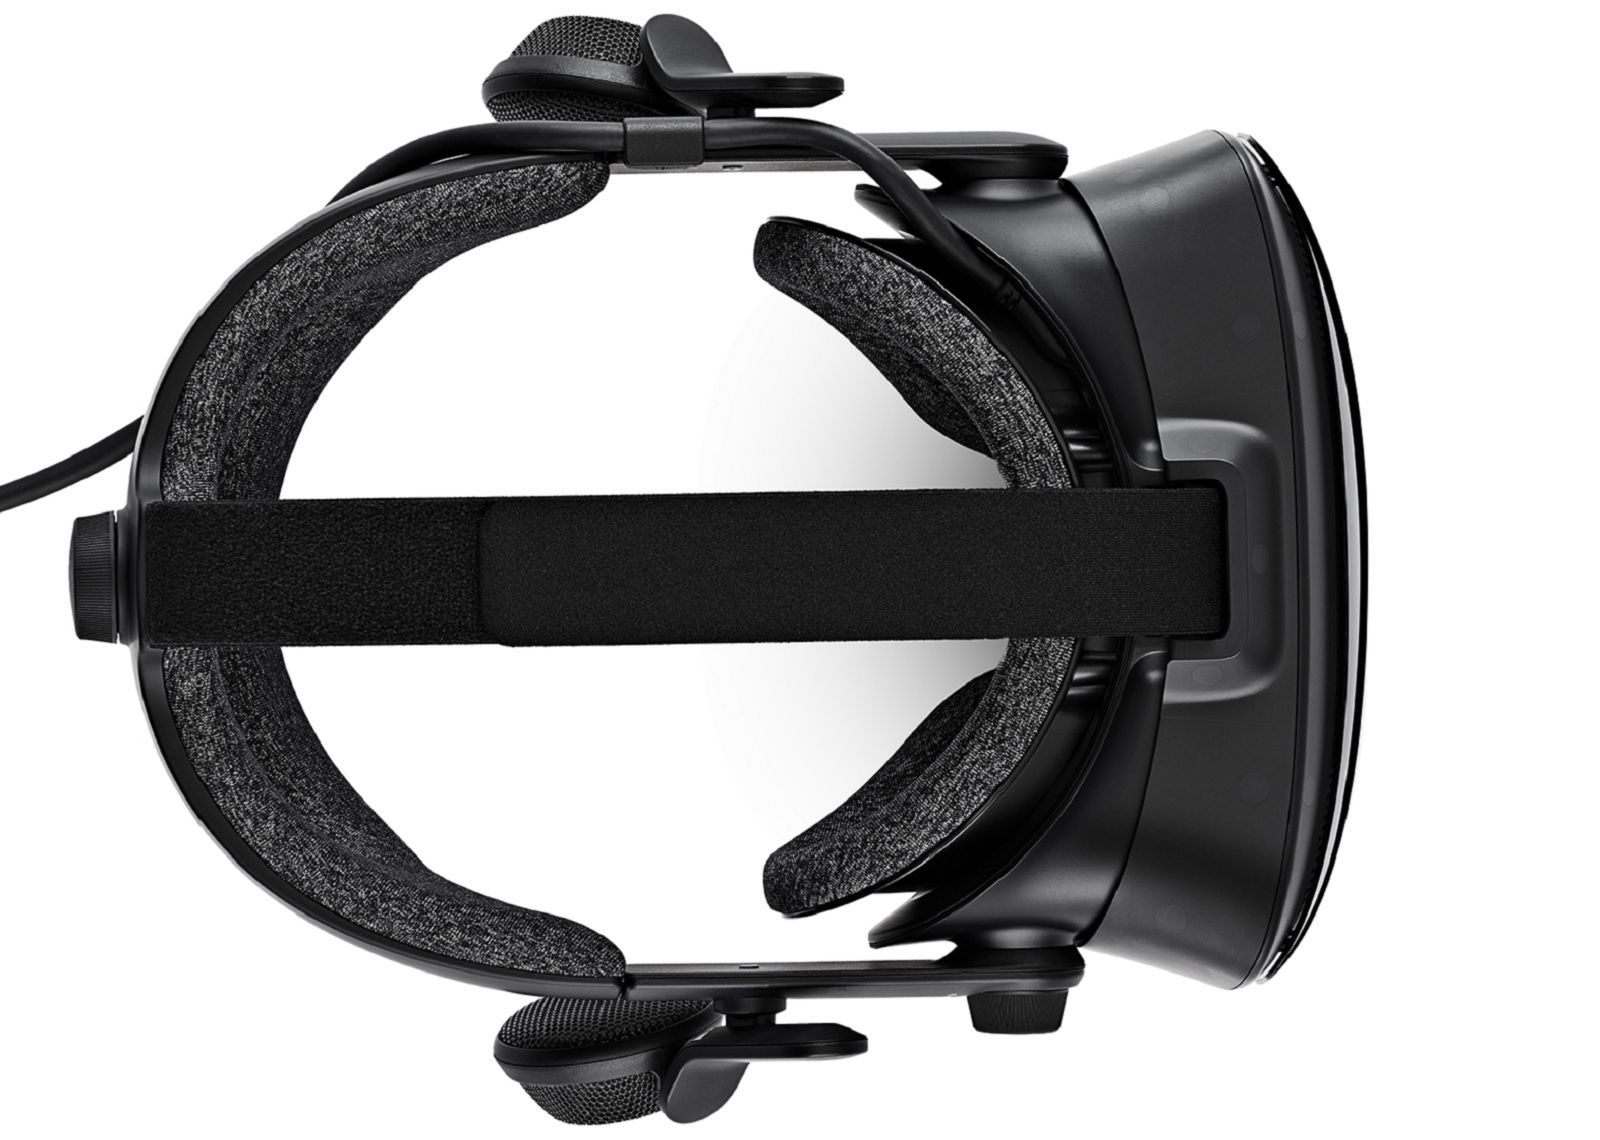 Valve Index Vr Headset Everything You Need To Know image 3